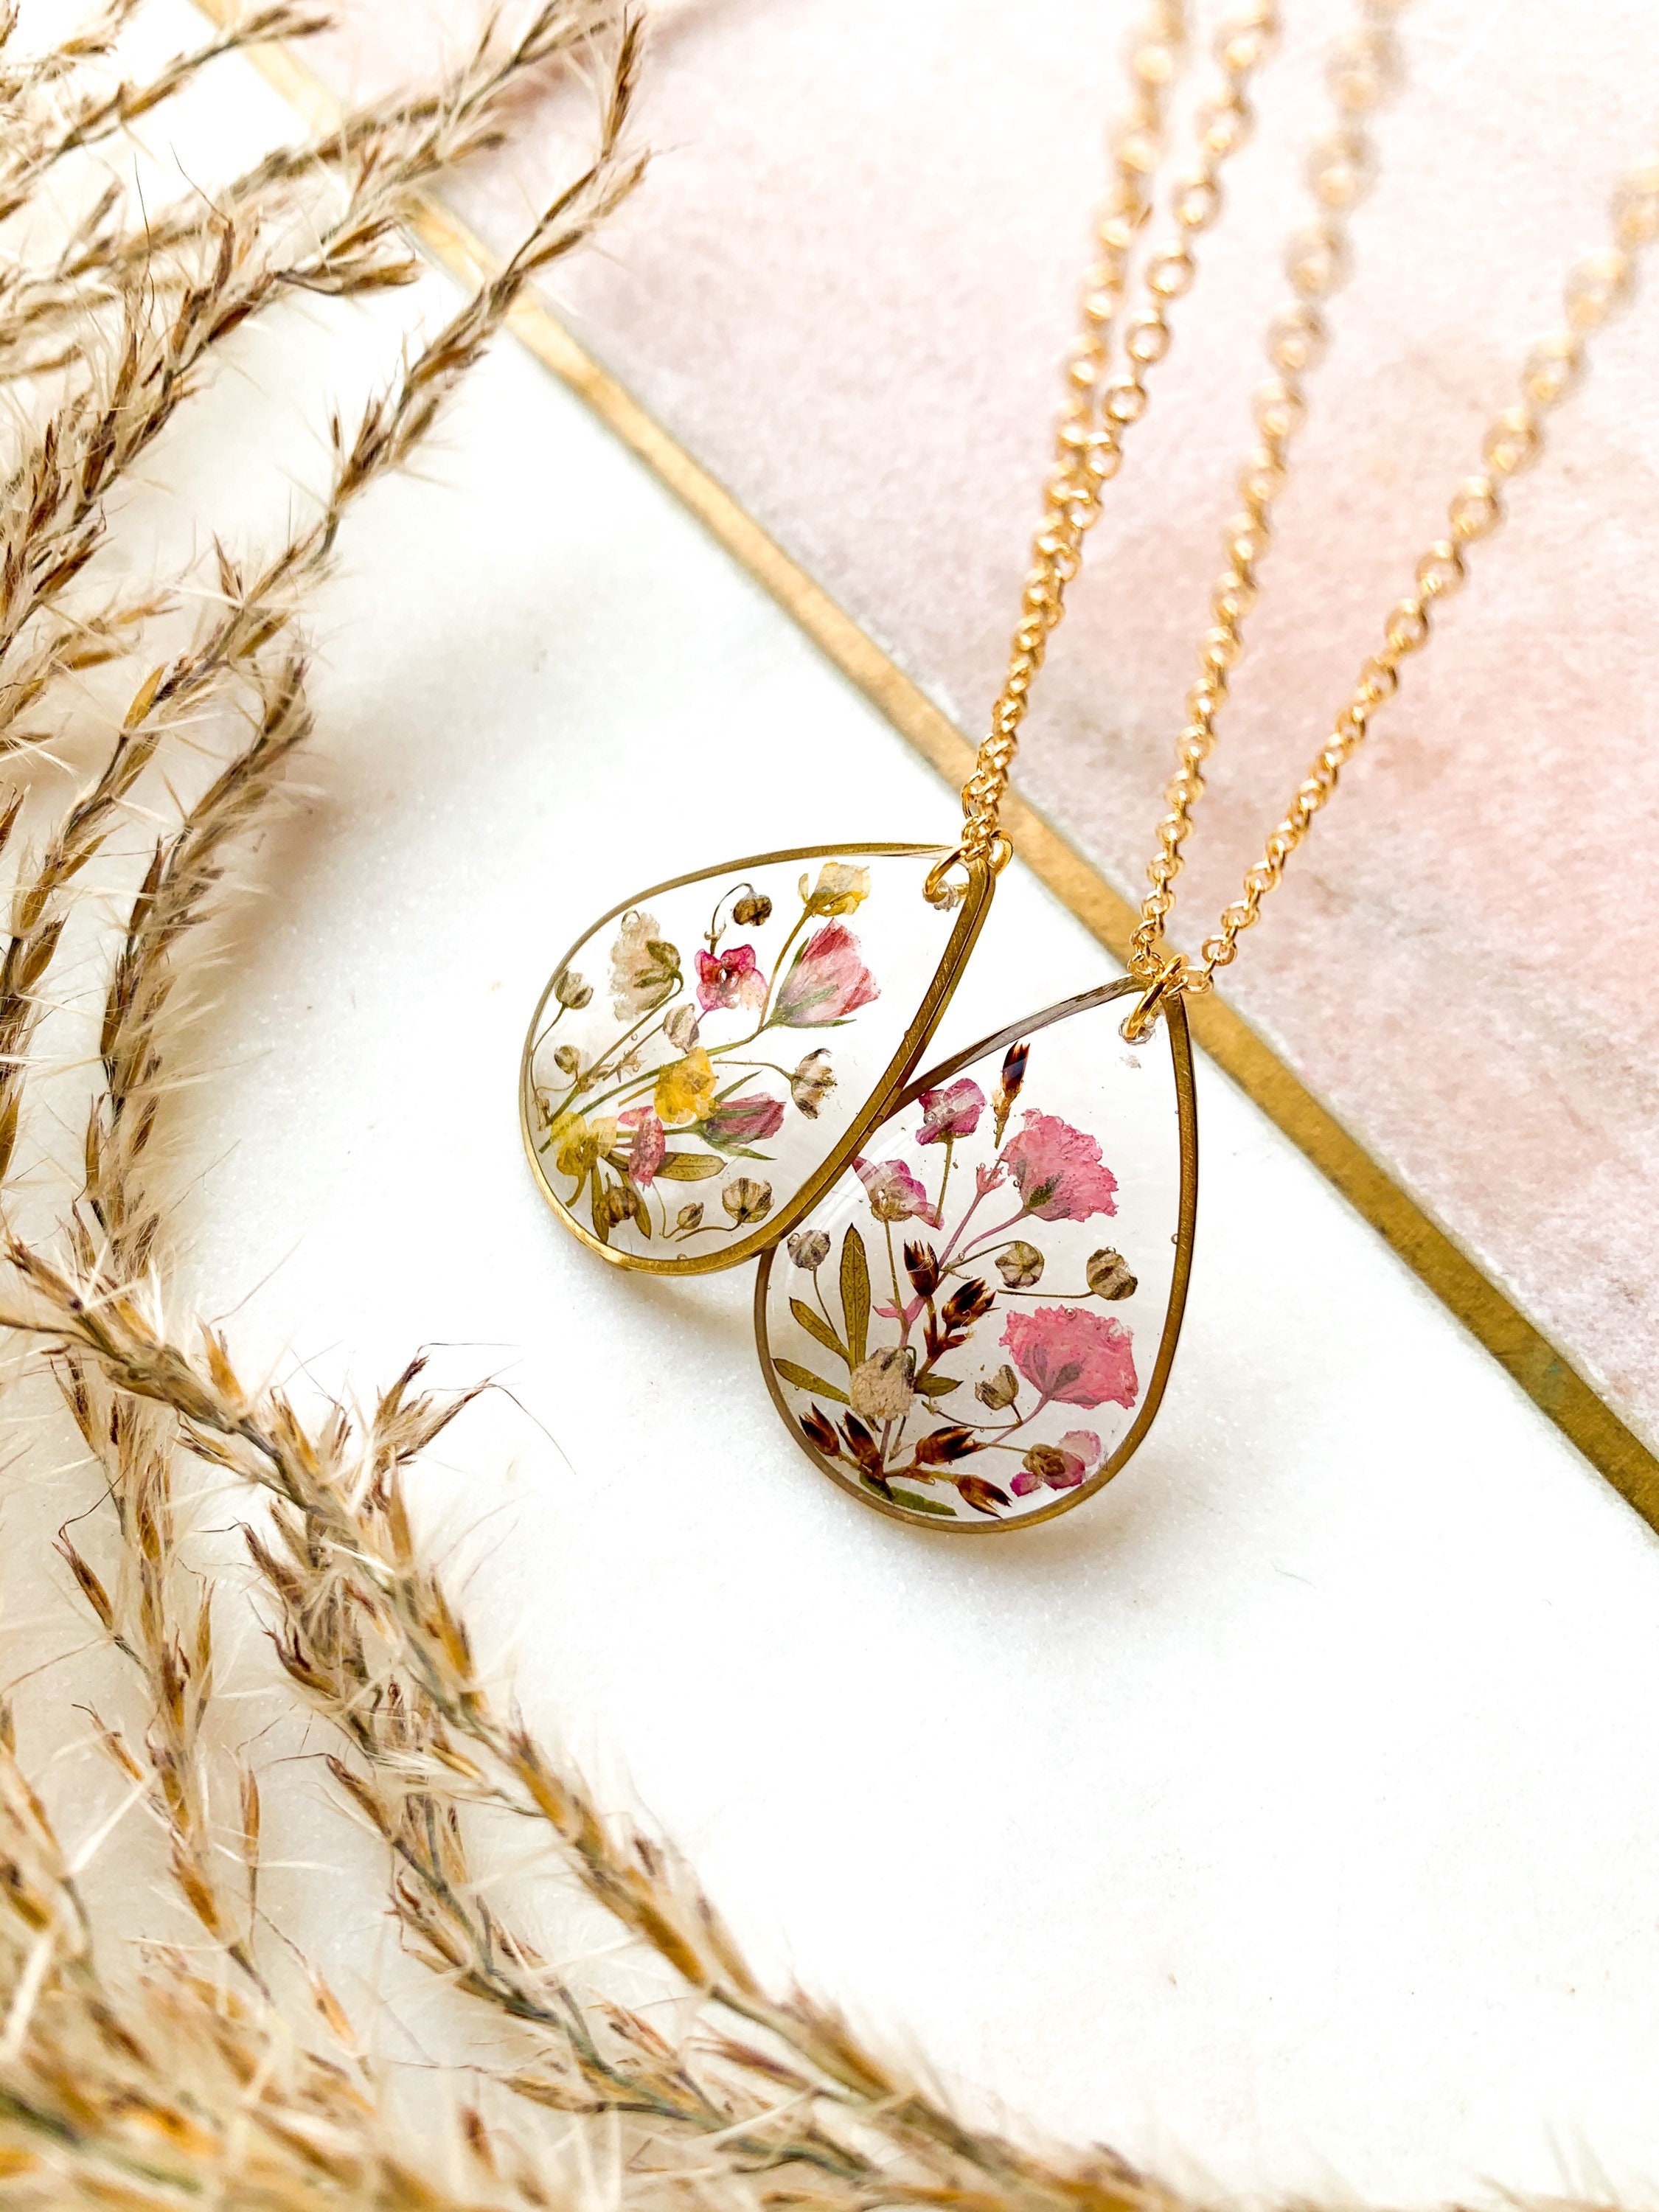 Preserved Wild Flower Pendant Necklace On 22K Gold Plated Fine Chain/Boho Chic Pressed Flowers Jewellery Floral